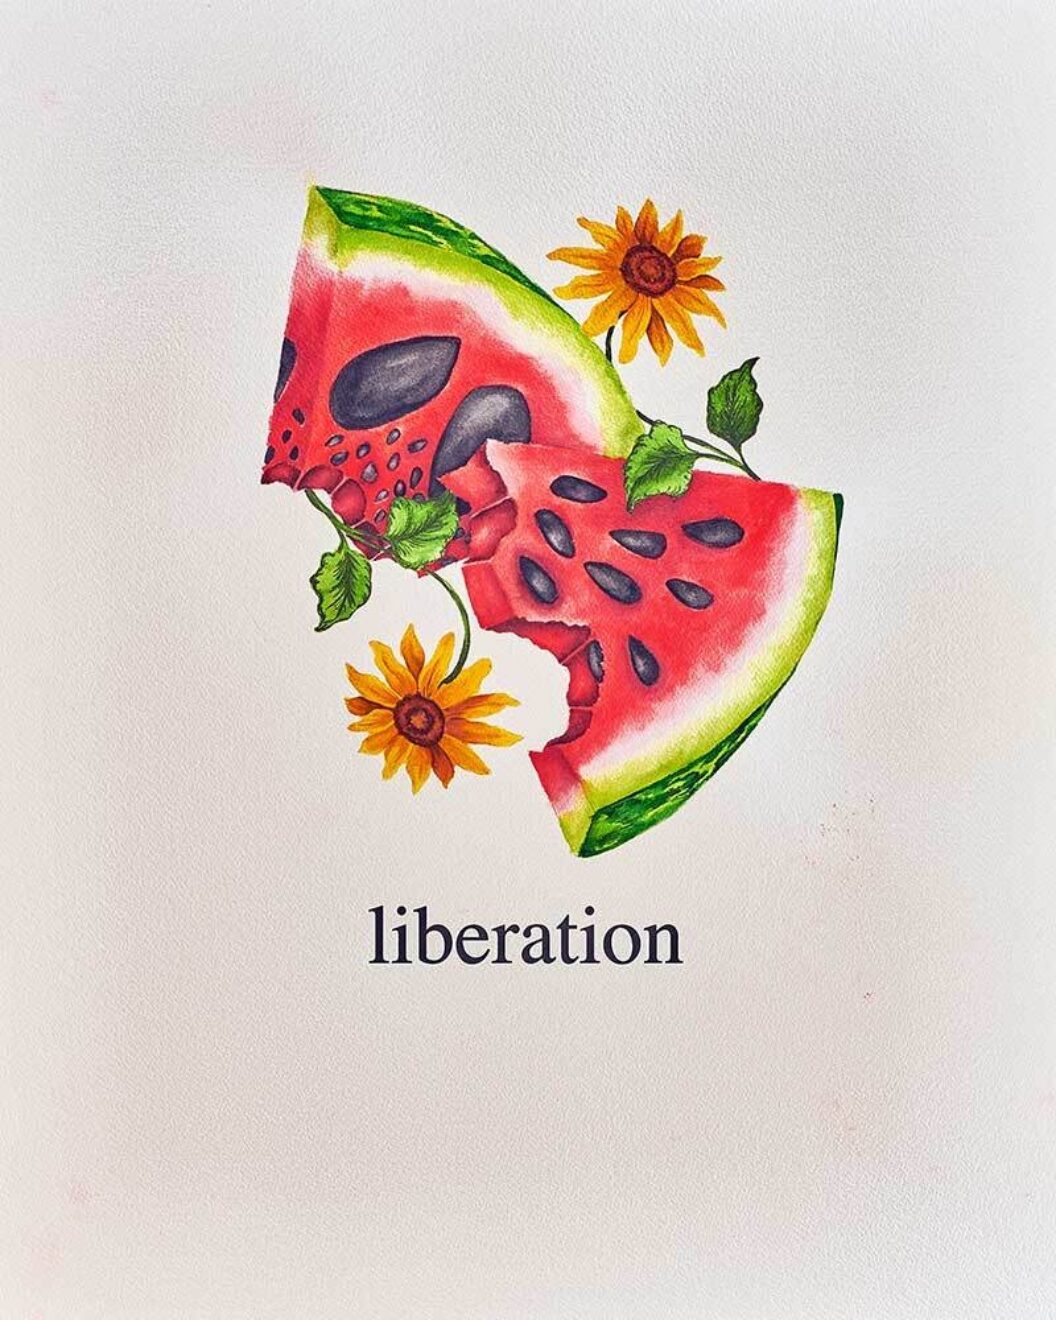 A color drawing of a pieces of watermelon and flowers with the word liberation in black type beneath it.